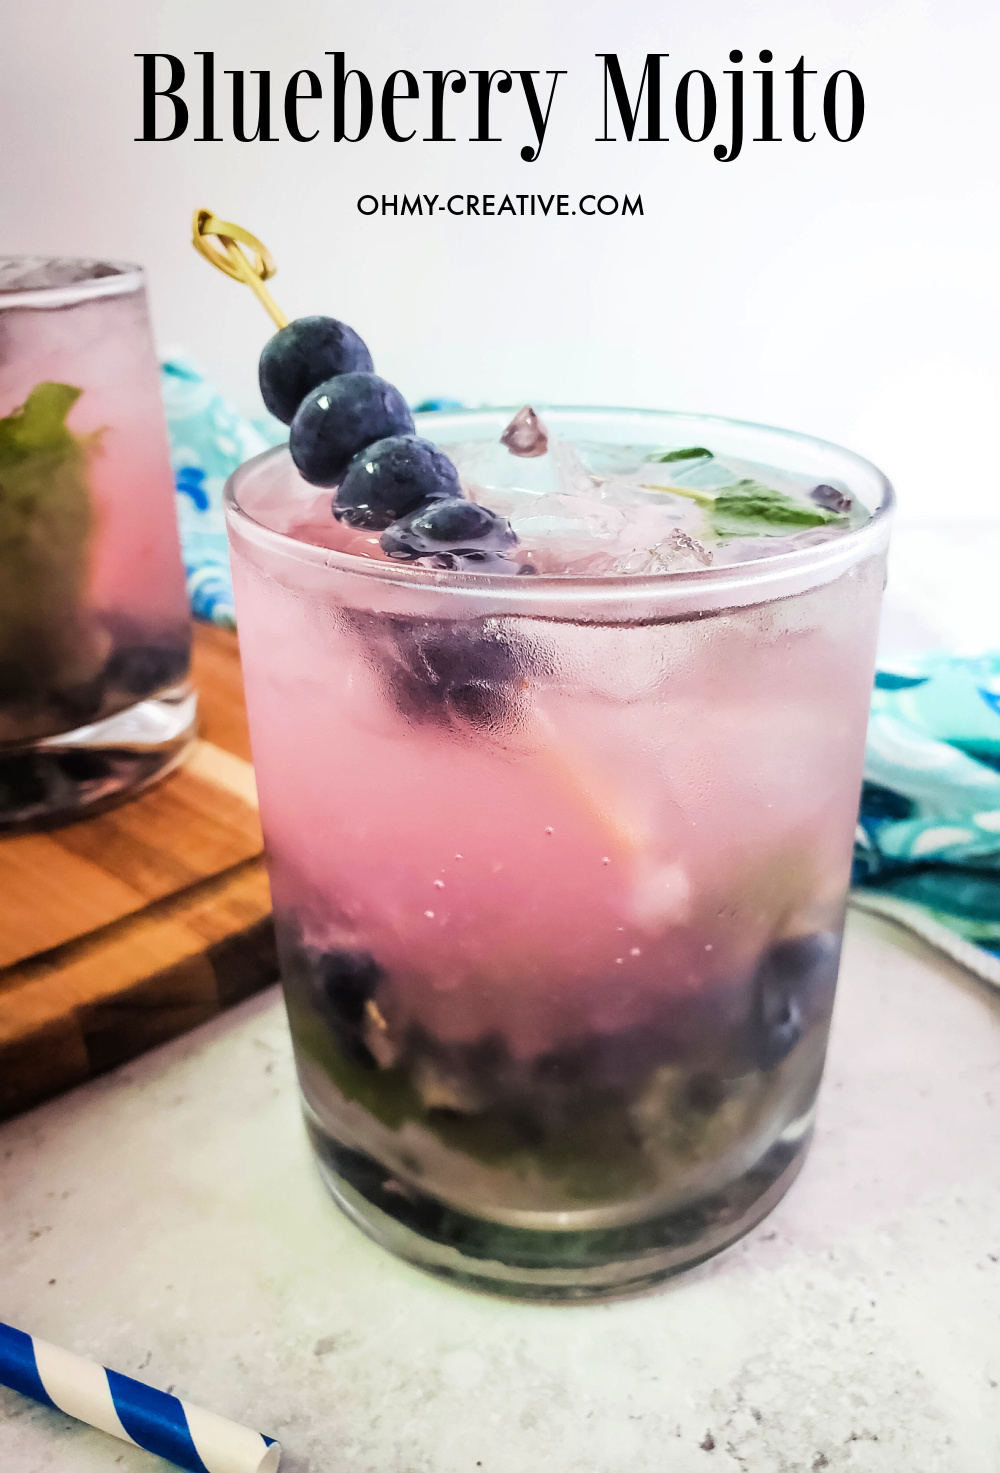 A blueberry mojito cocktail garnished with a skewer of blueberries and surrounded by a aqua hand towel and blue striped straw